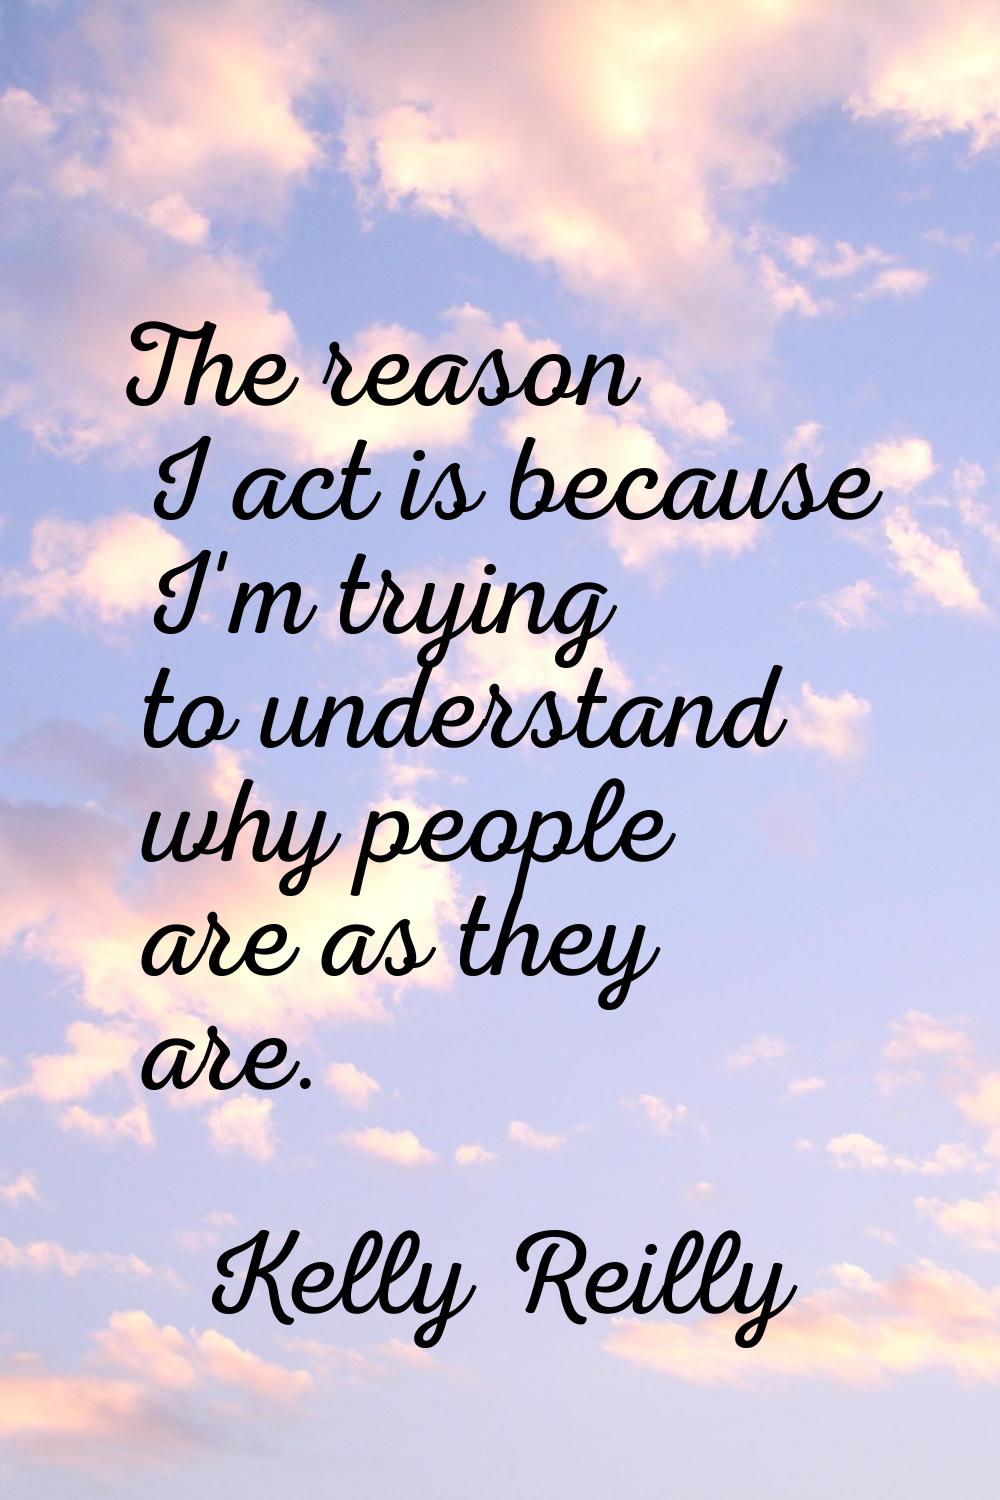 The reason I act is because I'm trying to understand why people are as they are.